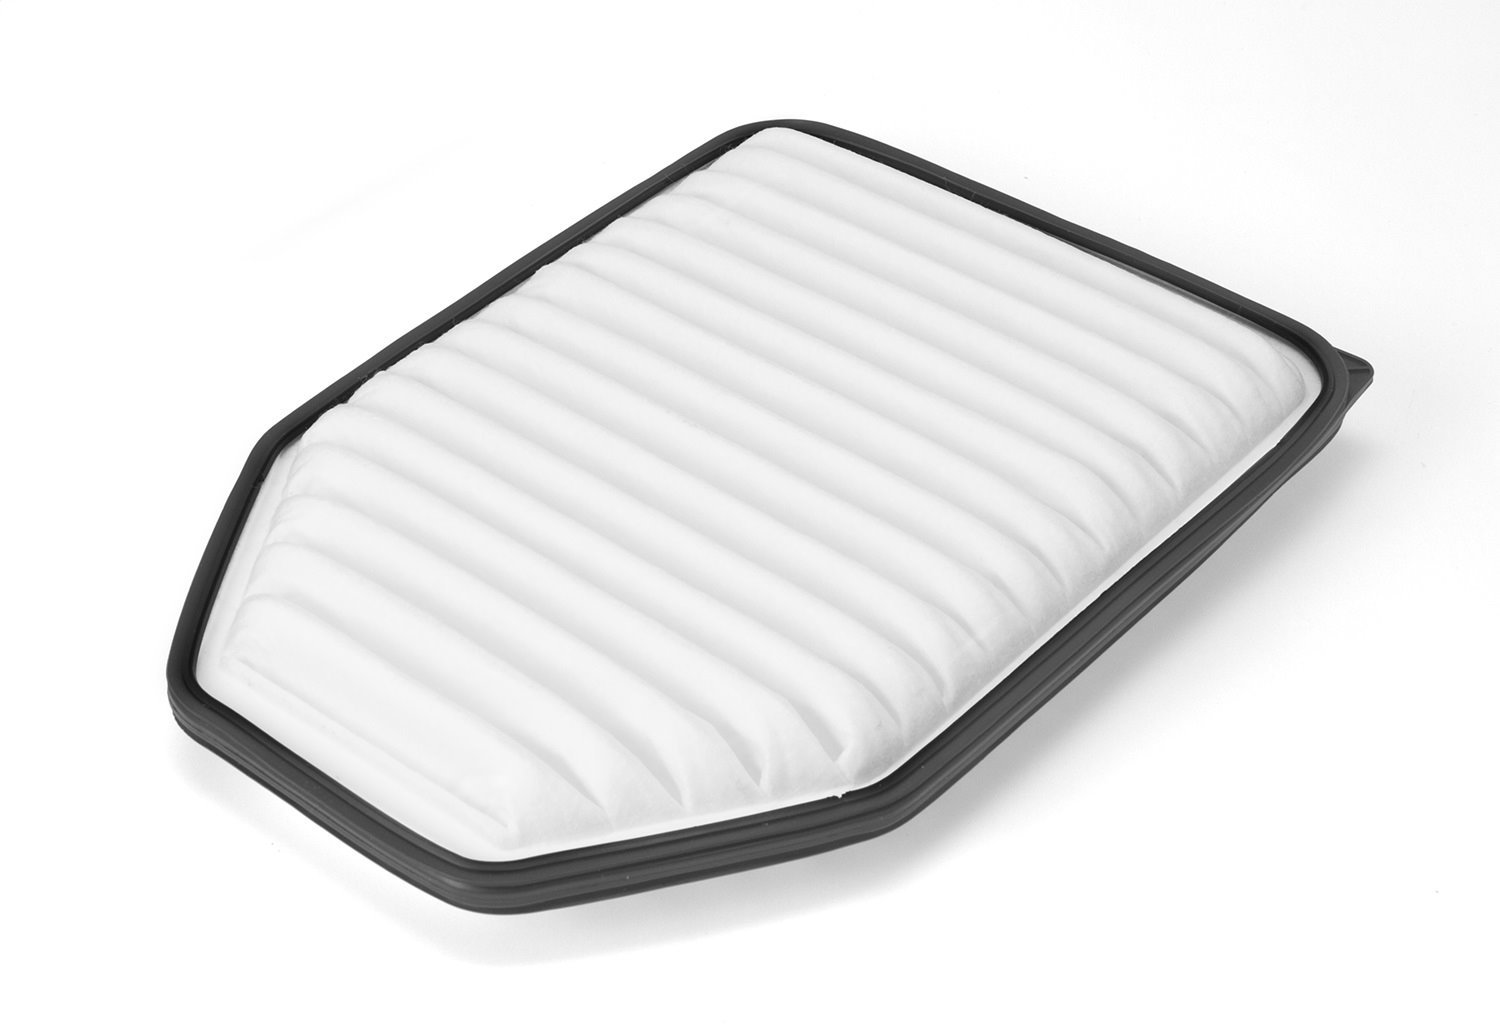 Replacement air filter from Omix-ADA, Fits 07-16 Jeep Wrangler with 3.6L and 3.8L engines.